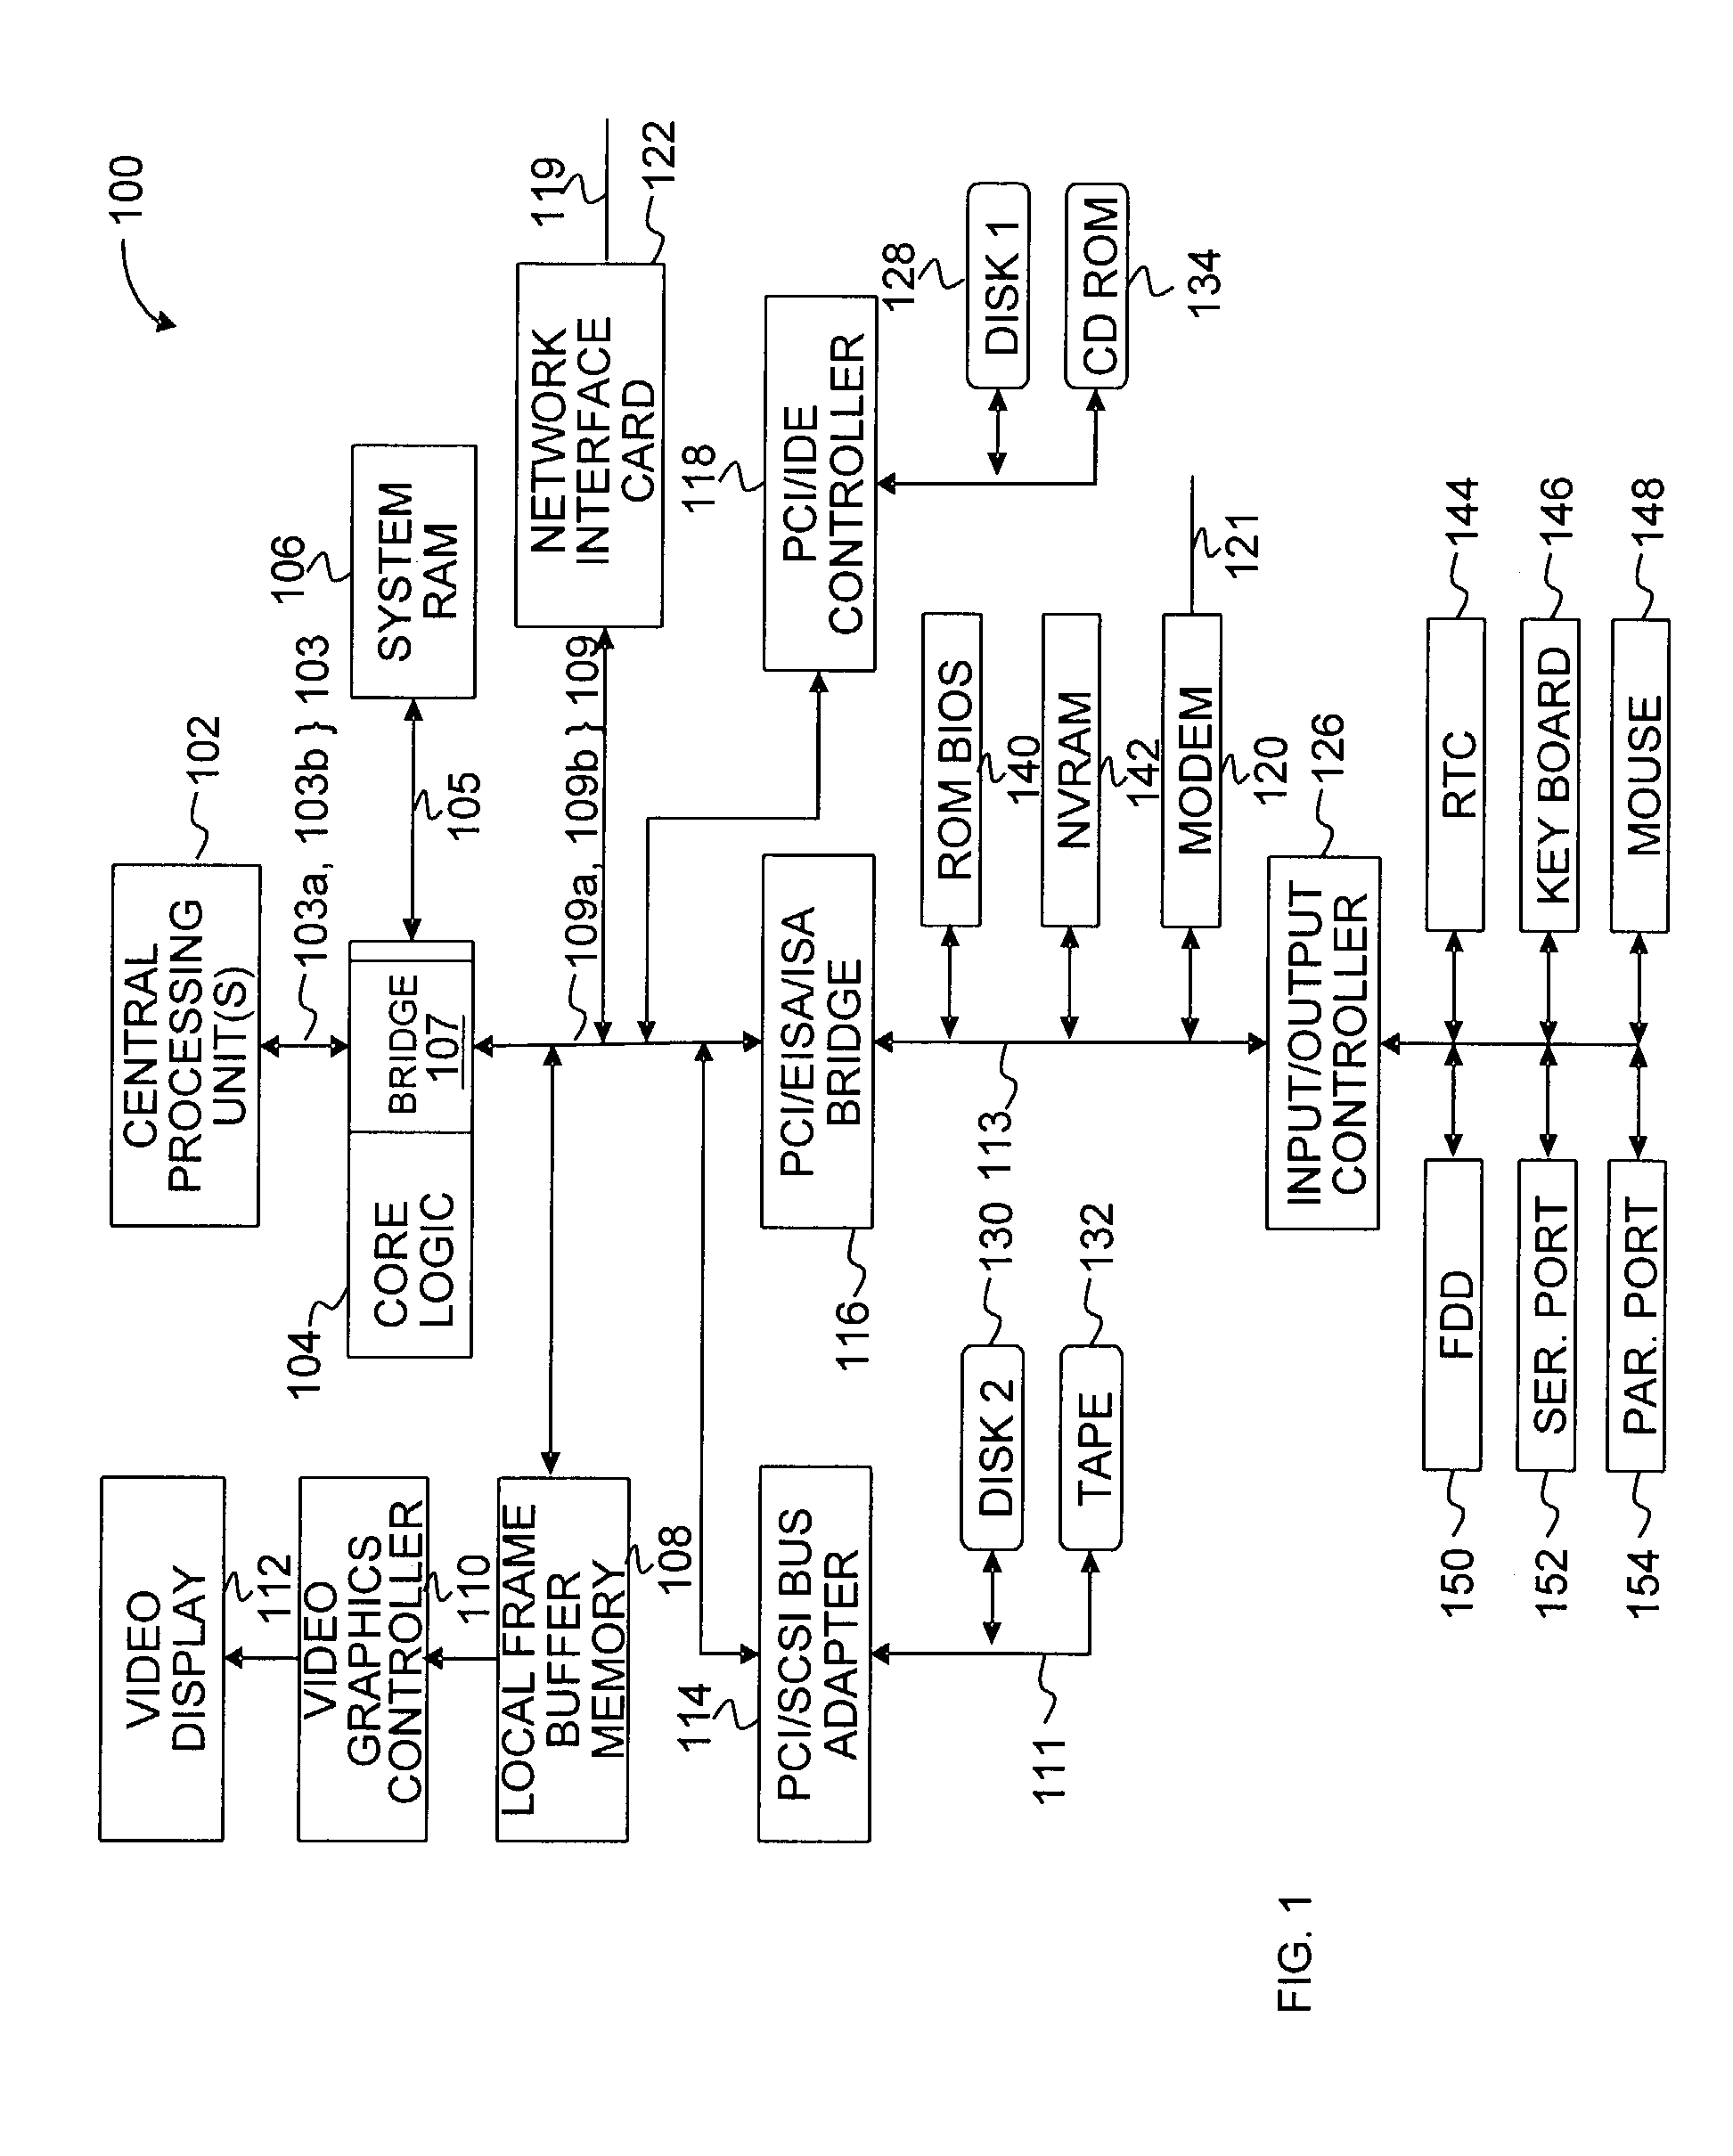 Supporting a host-to-input/output (I/O) bridge